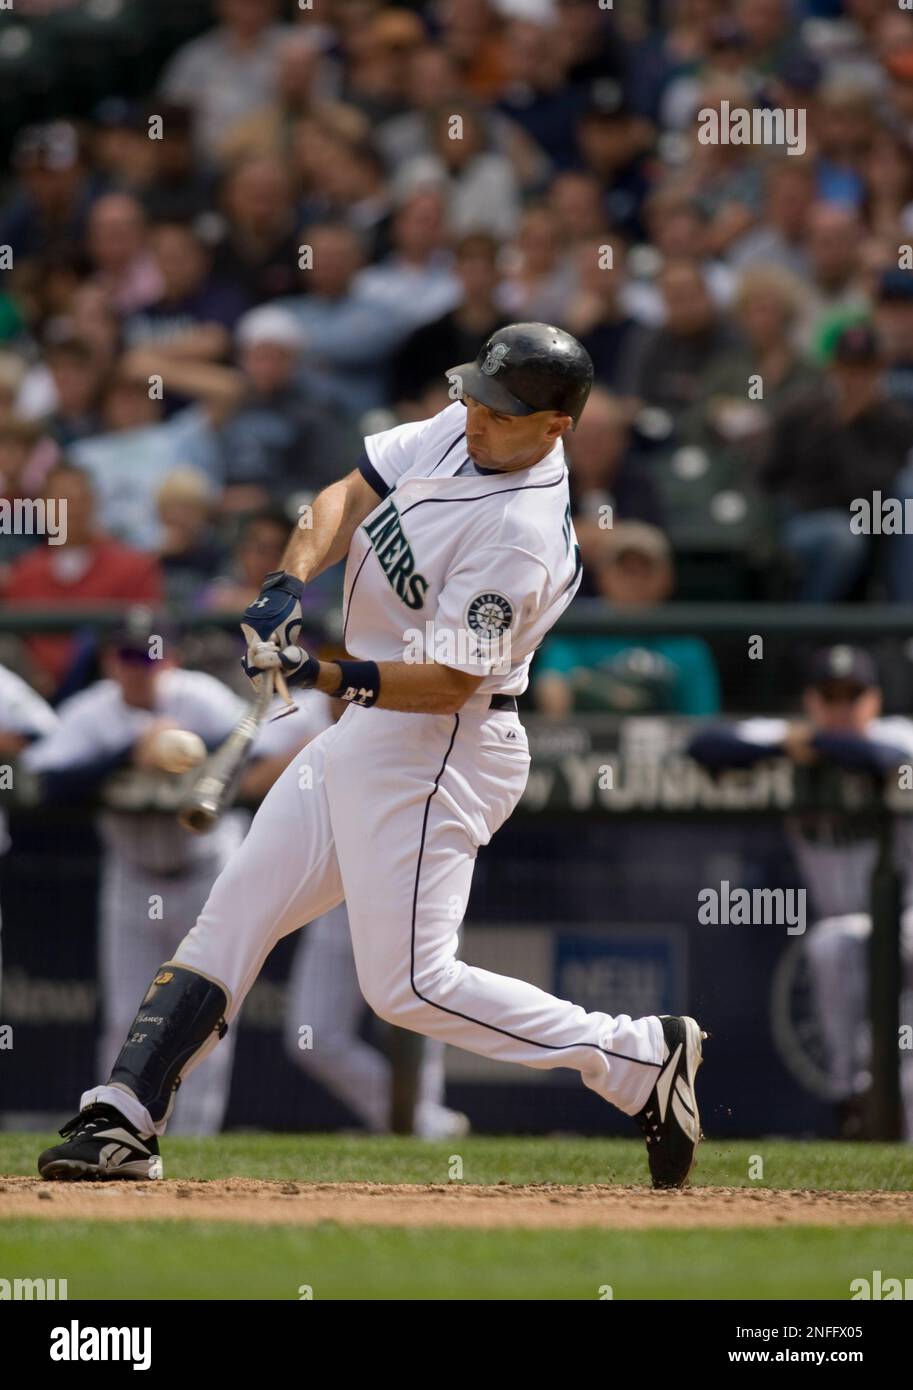 Seattle Mariners' Raul Ibanez breaks a bat on a pitch against the Minnesota  Twins during their baseball game in Seattle Wednesday, Aug. 27, 2008. (AP  Photo/John Froschauer Stock Photo - Alamy